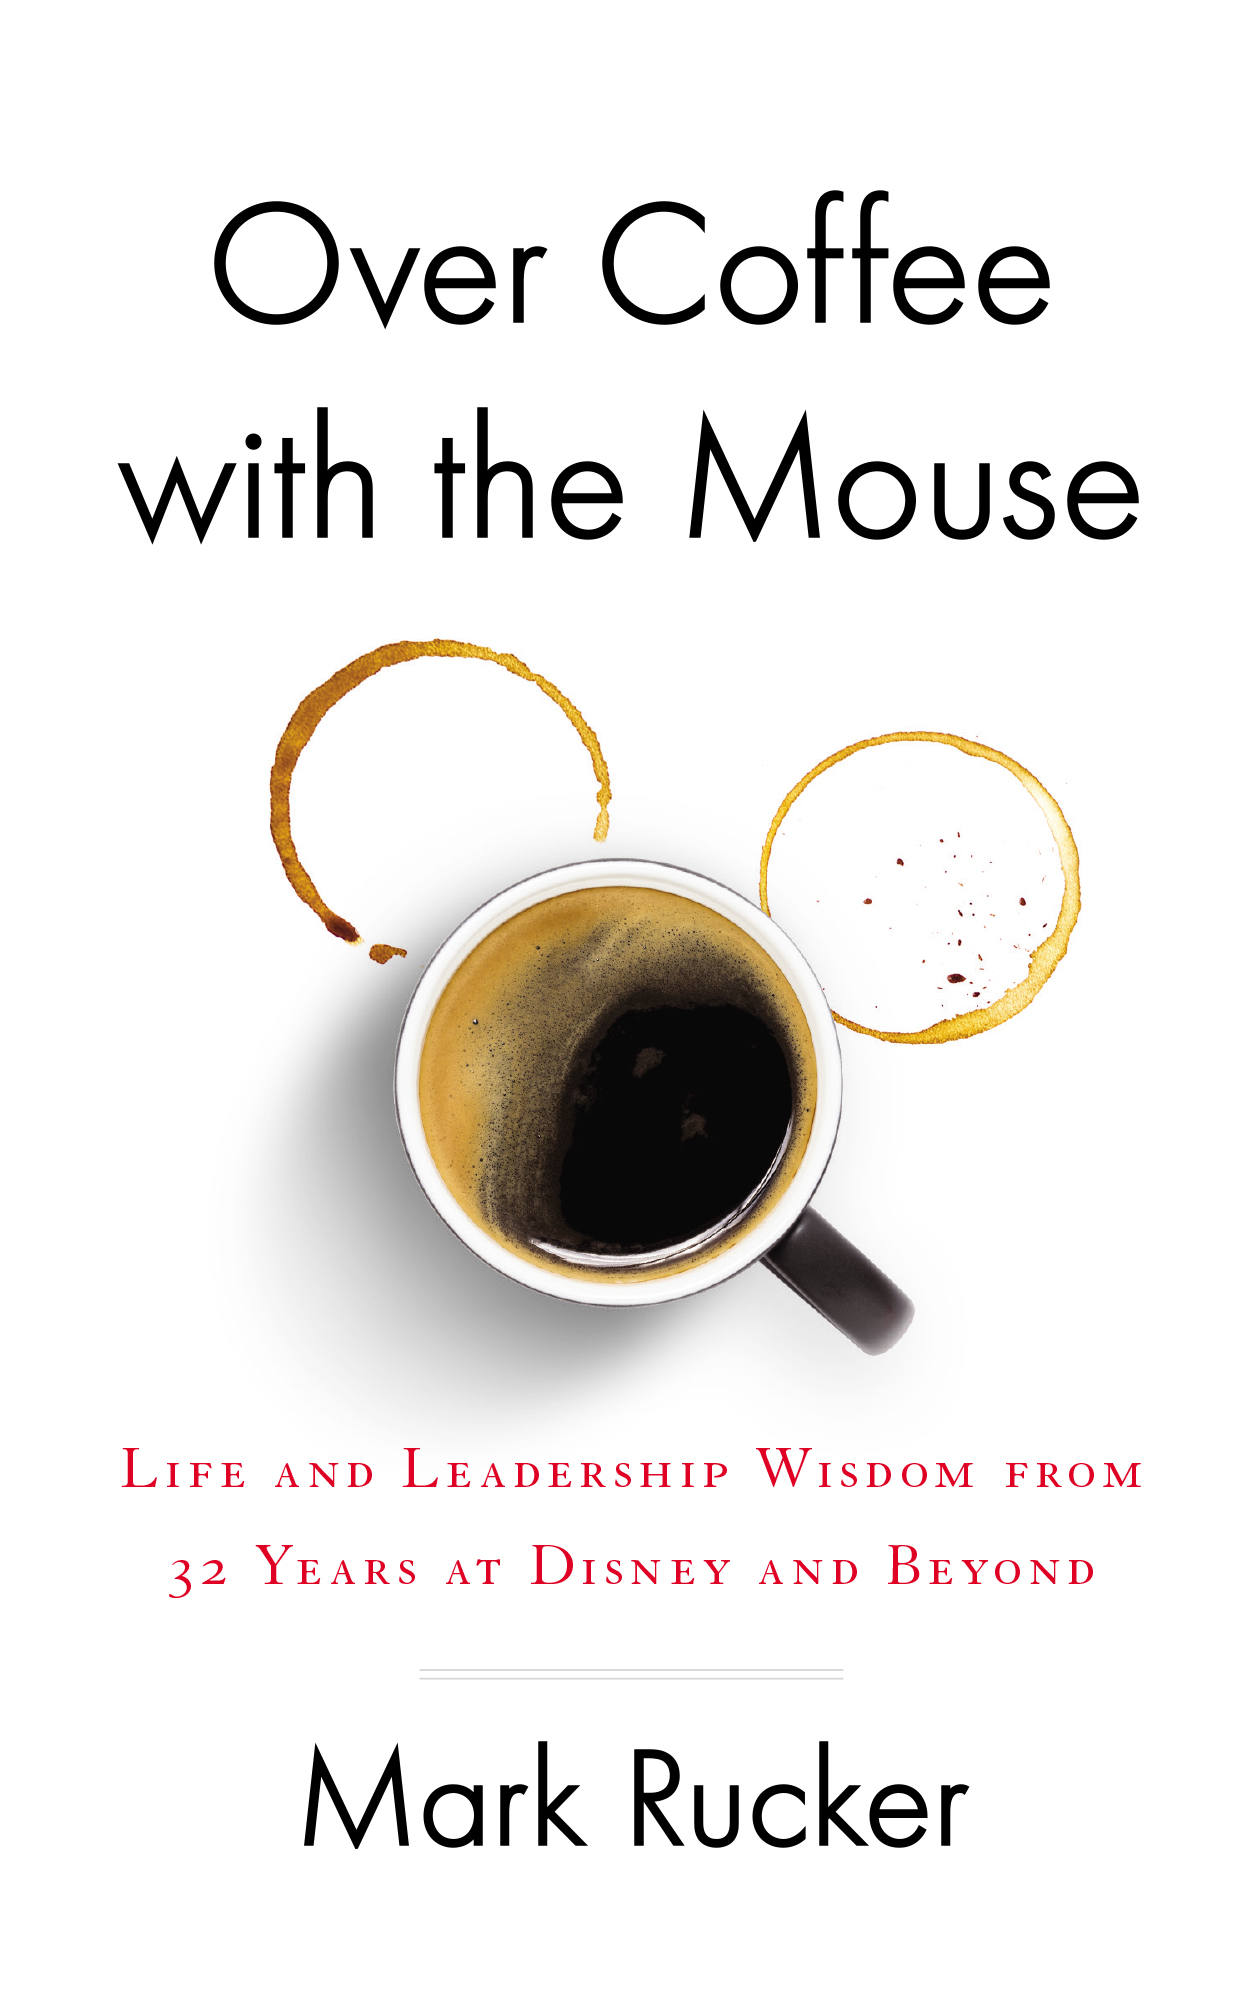 Over Coffee With the Mouse: Life and Leadership Wisdom From 32 Years at Disney and Beyond